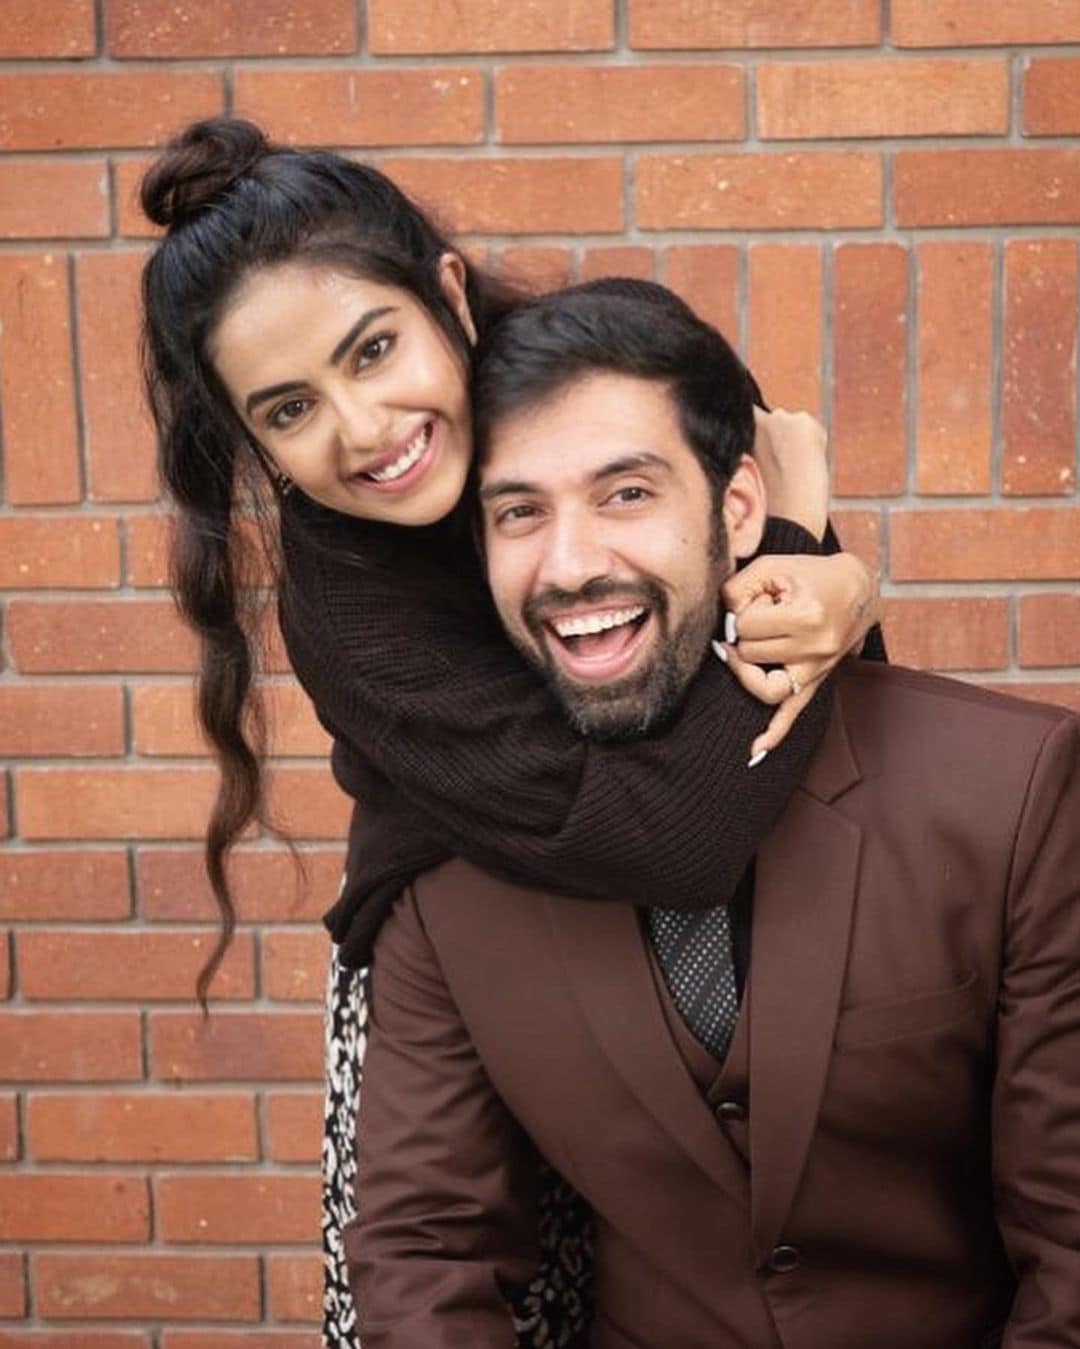 Avika Gor is seen here with her boyfriend Milind Chandwani for a photoshoot. Both look cute together in this picture